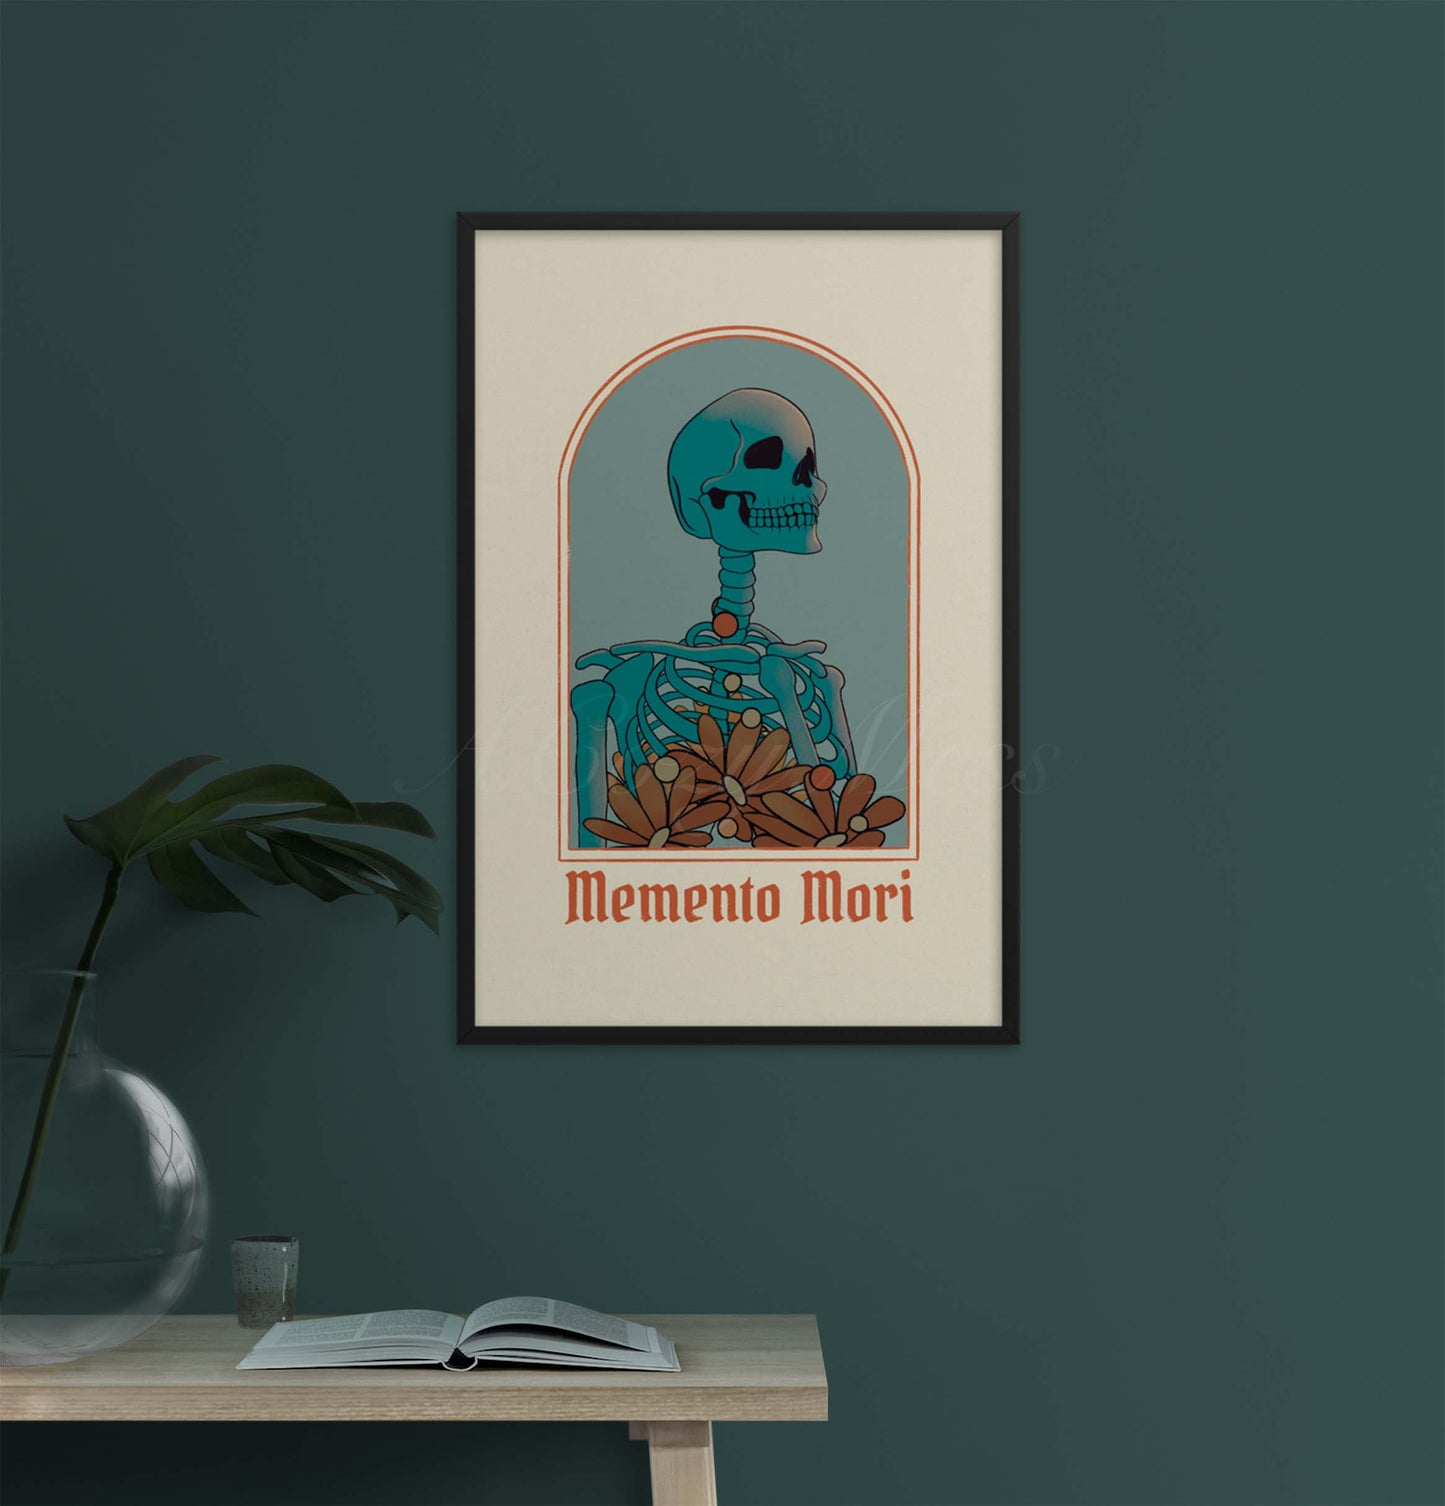 An art poster featuring a striking skeleton illustration with the words 'Memento Mori,' inviting reflection on mortality and the transient nature of life in blue, beige & orange hues. The print is framed in black frame.